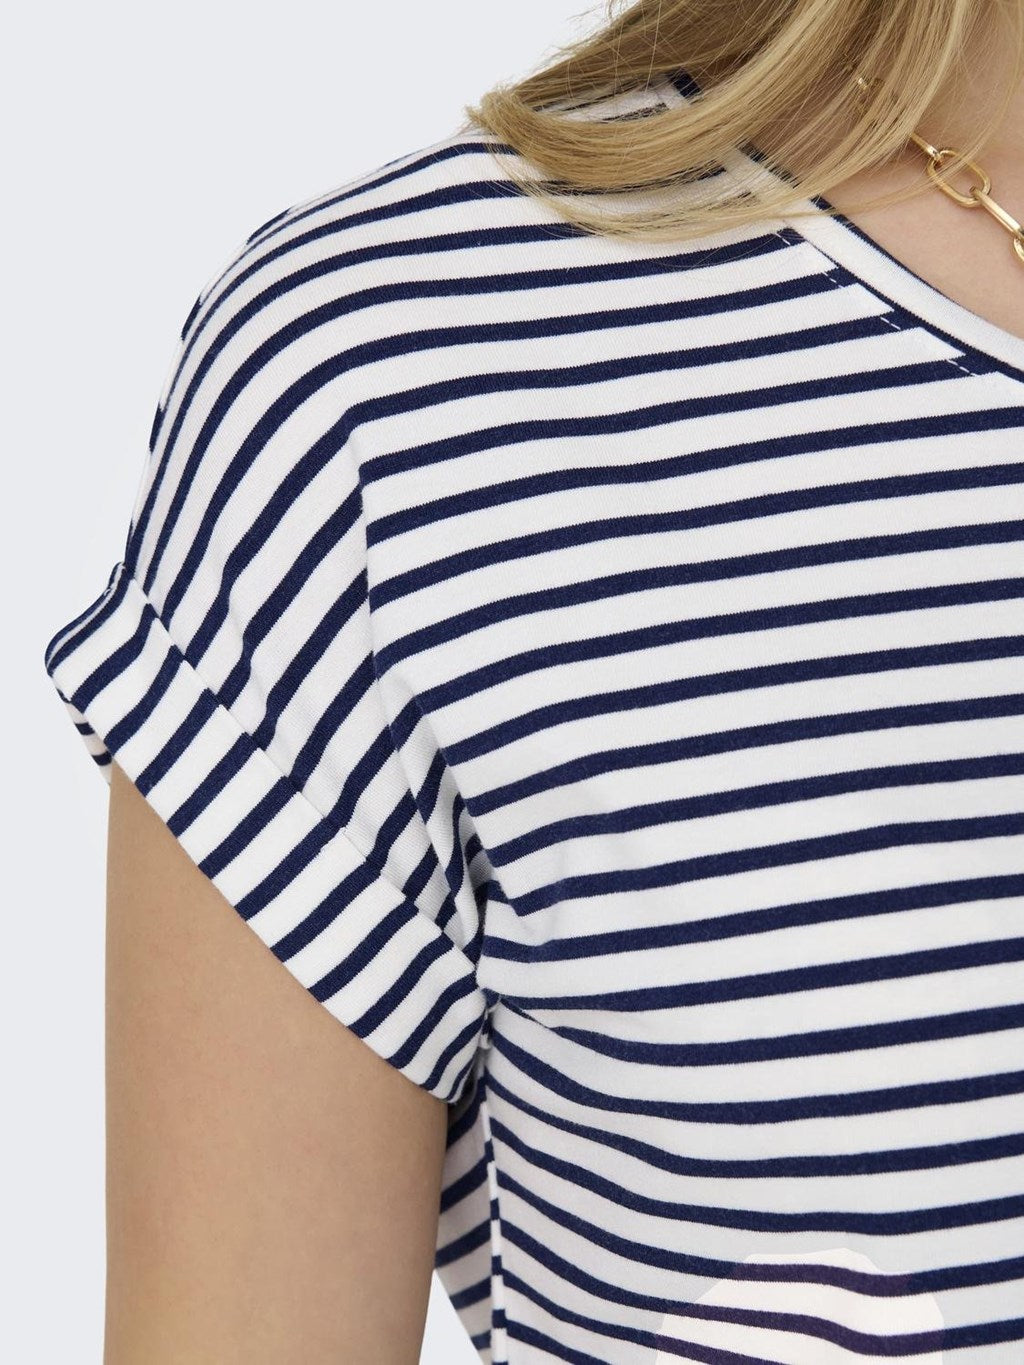 Navy striped t-shirt Only for women